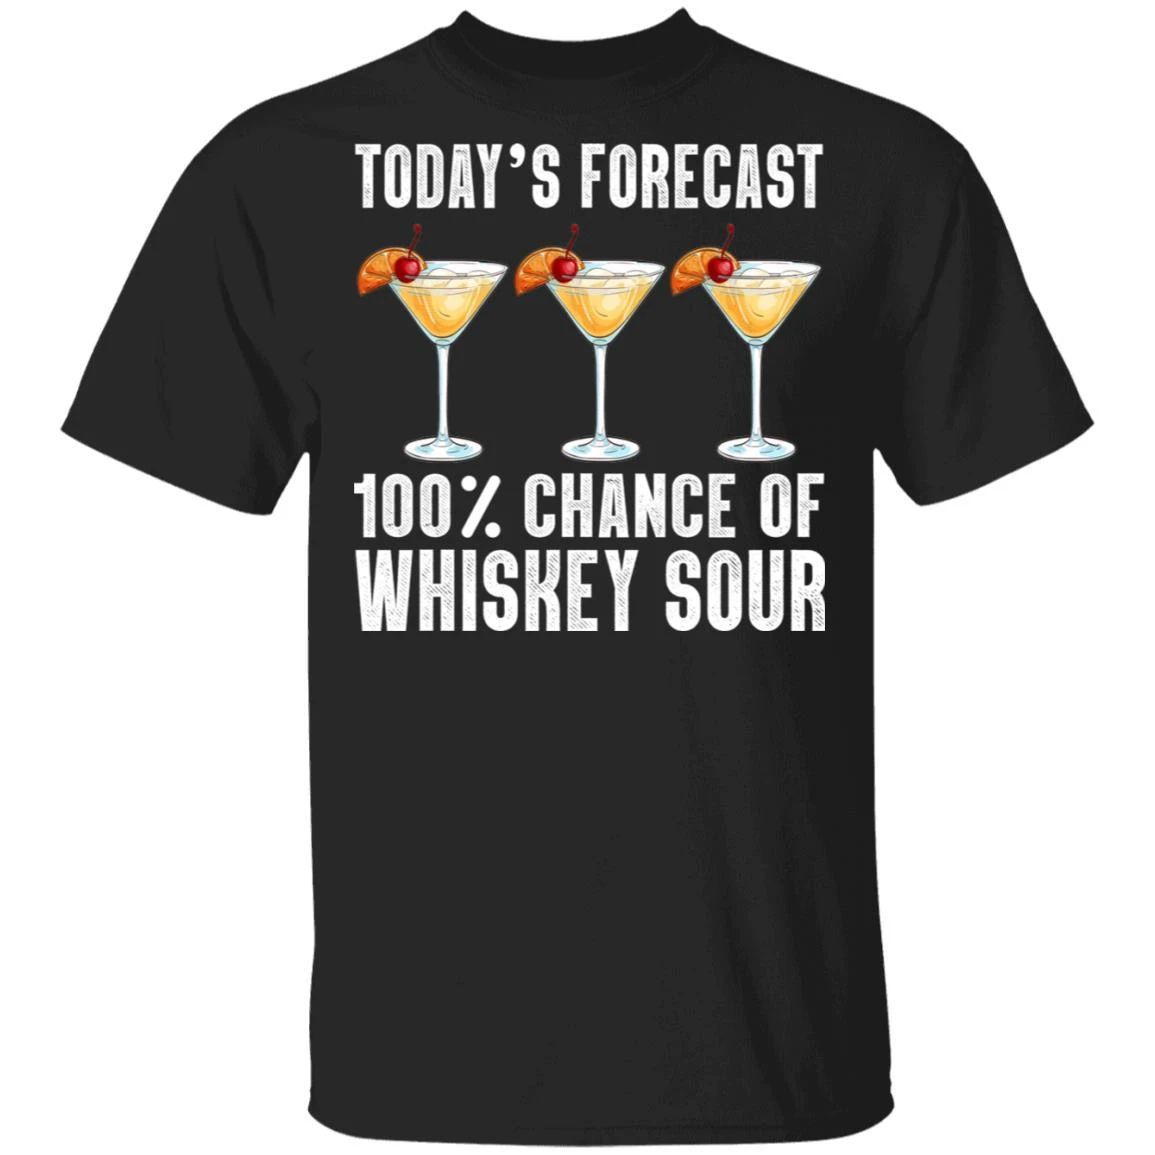 Today’s Forecast 100% Whiskey Sour T-shirt Cocktail Tee